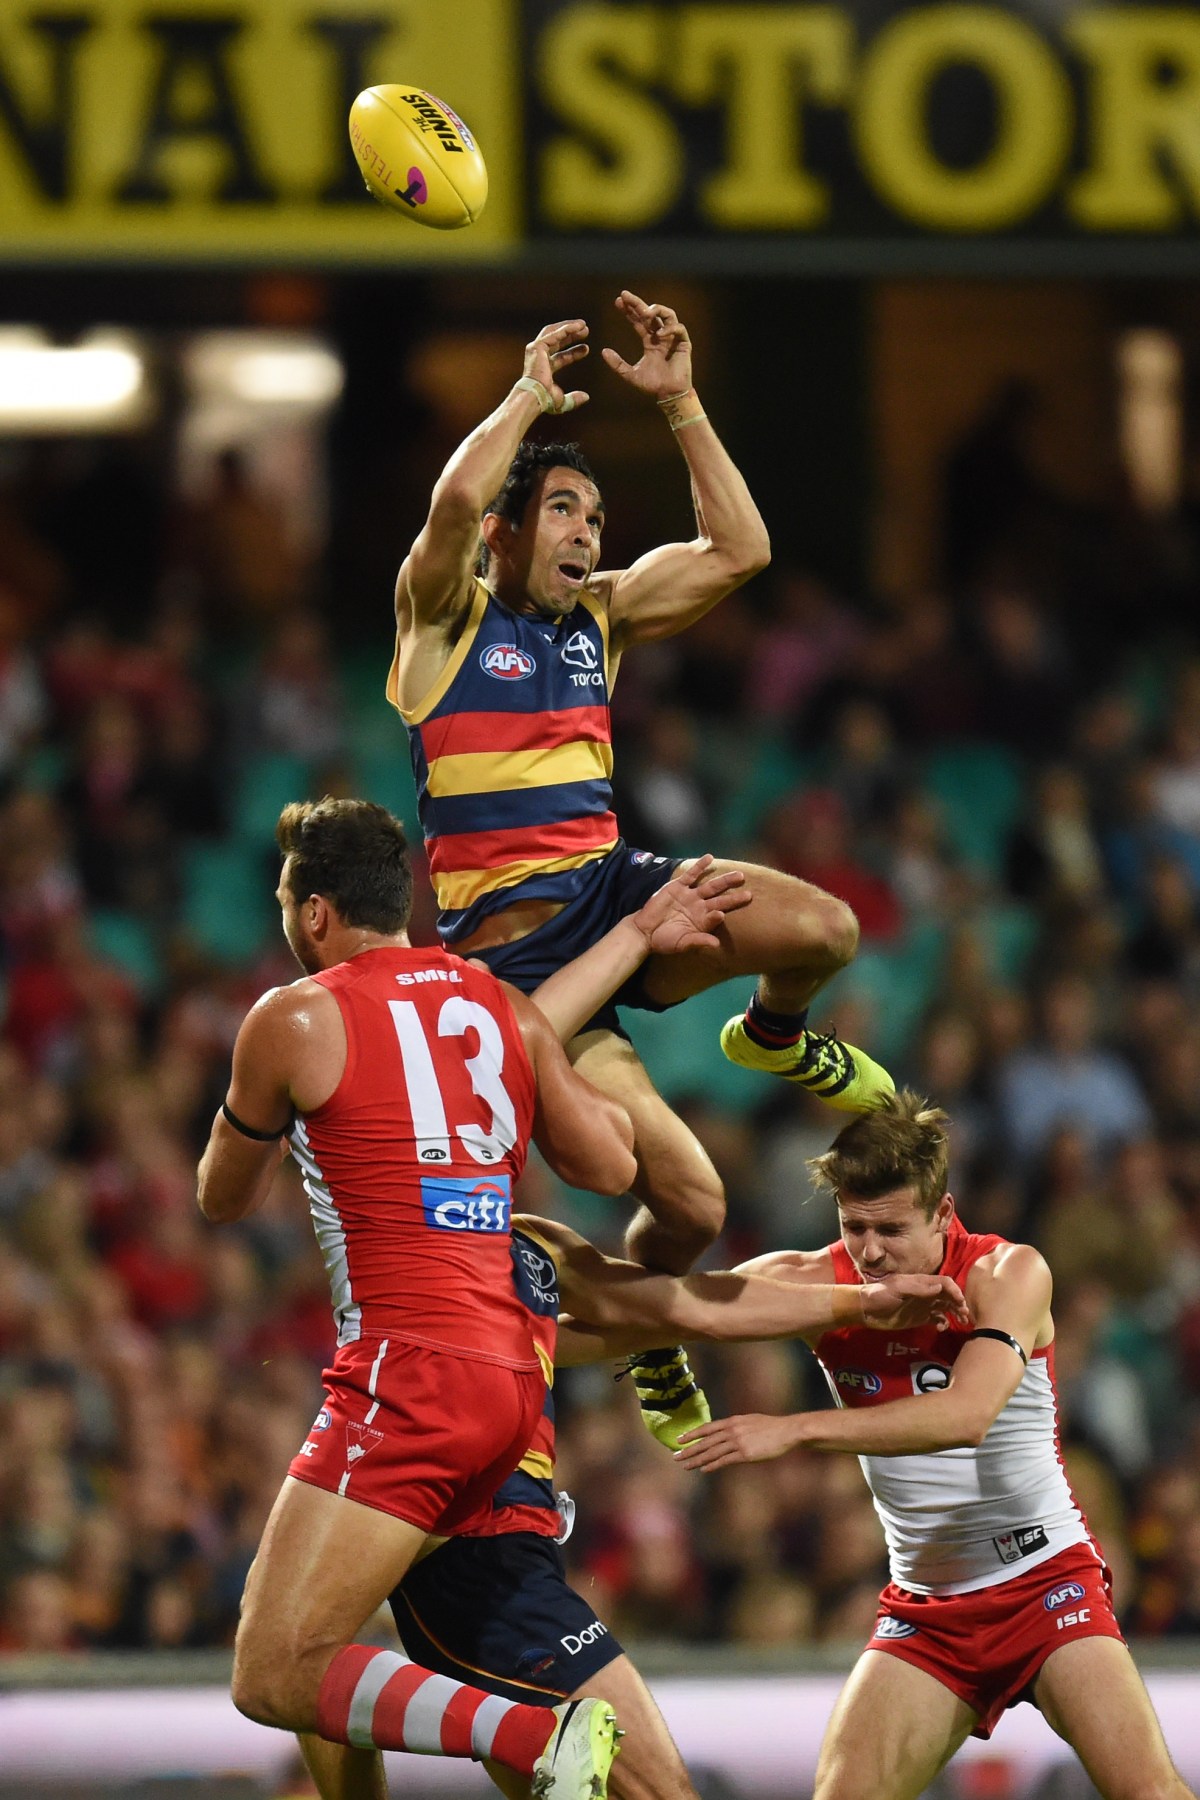 Eddie Betts of the Crows fails to mark during the 1st semi-final AFL match between the Sydney Swans and the Adelaide Crows at the Sydney Cricket Ground in Sydney, Saturday, Sept. 17, 2016. (AAP Image/Dean Lewins) NO ARCHIVING, EDITORIAL USE ONLY